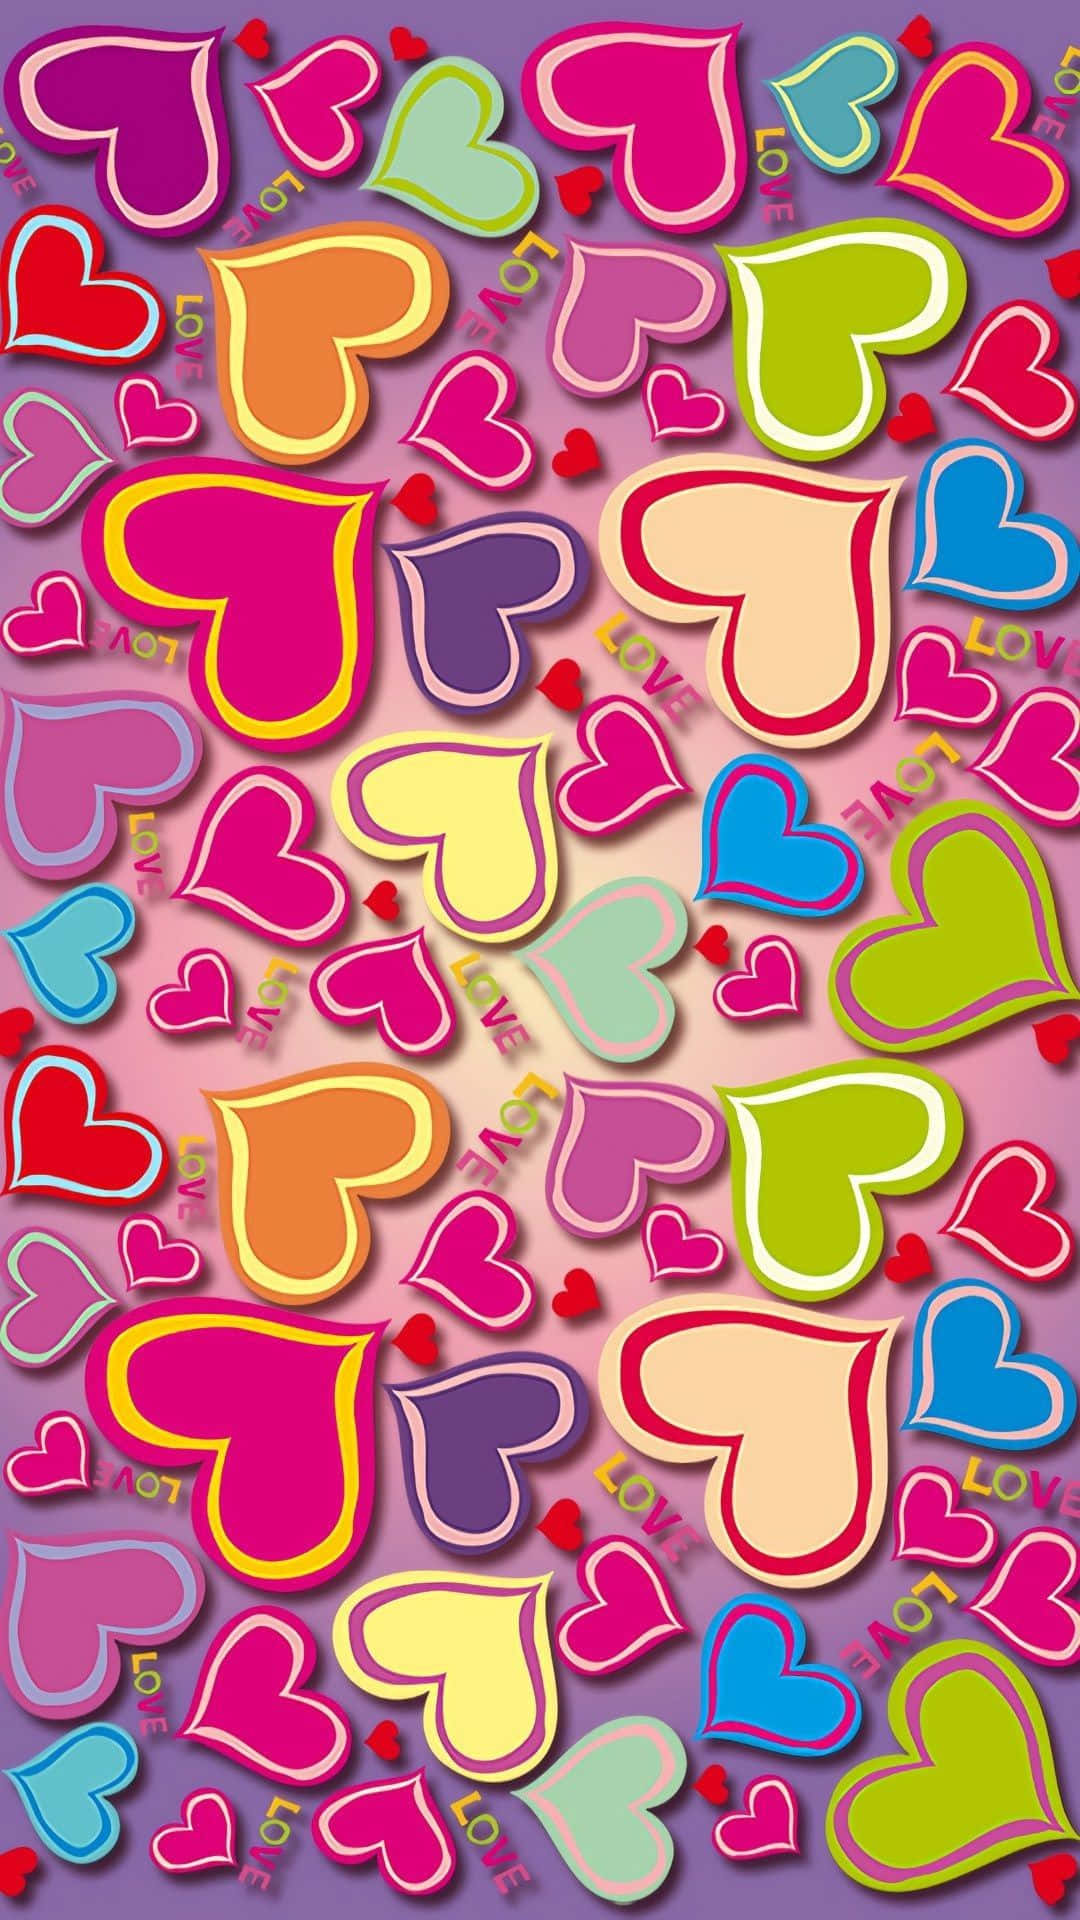 Cute Colorful Scattered Heart Shape Wallpaper